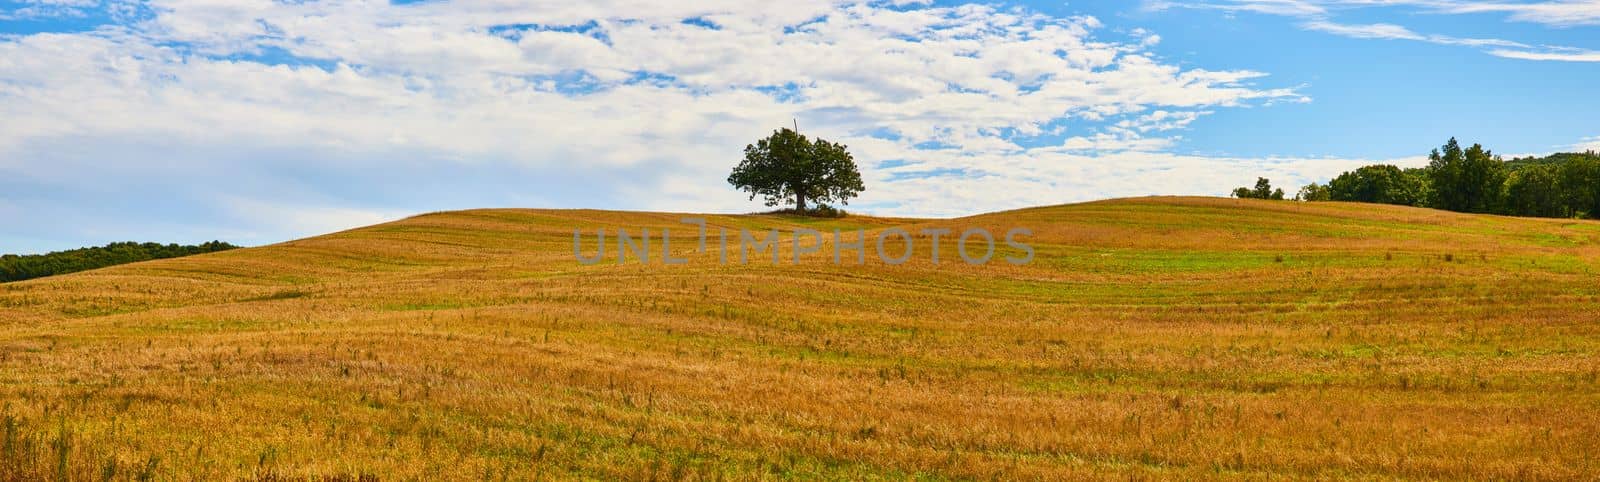 Image of Panoramic view of golden fields in country hills with lone green tree in center frame and blue sky